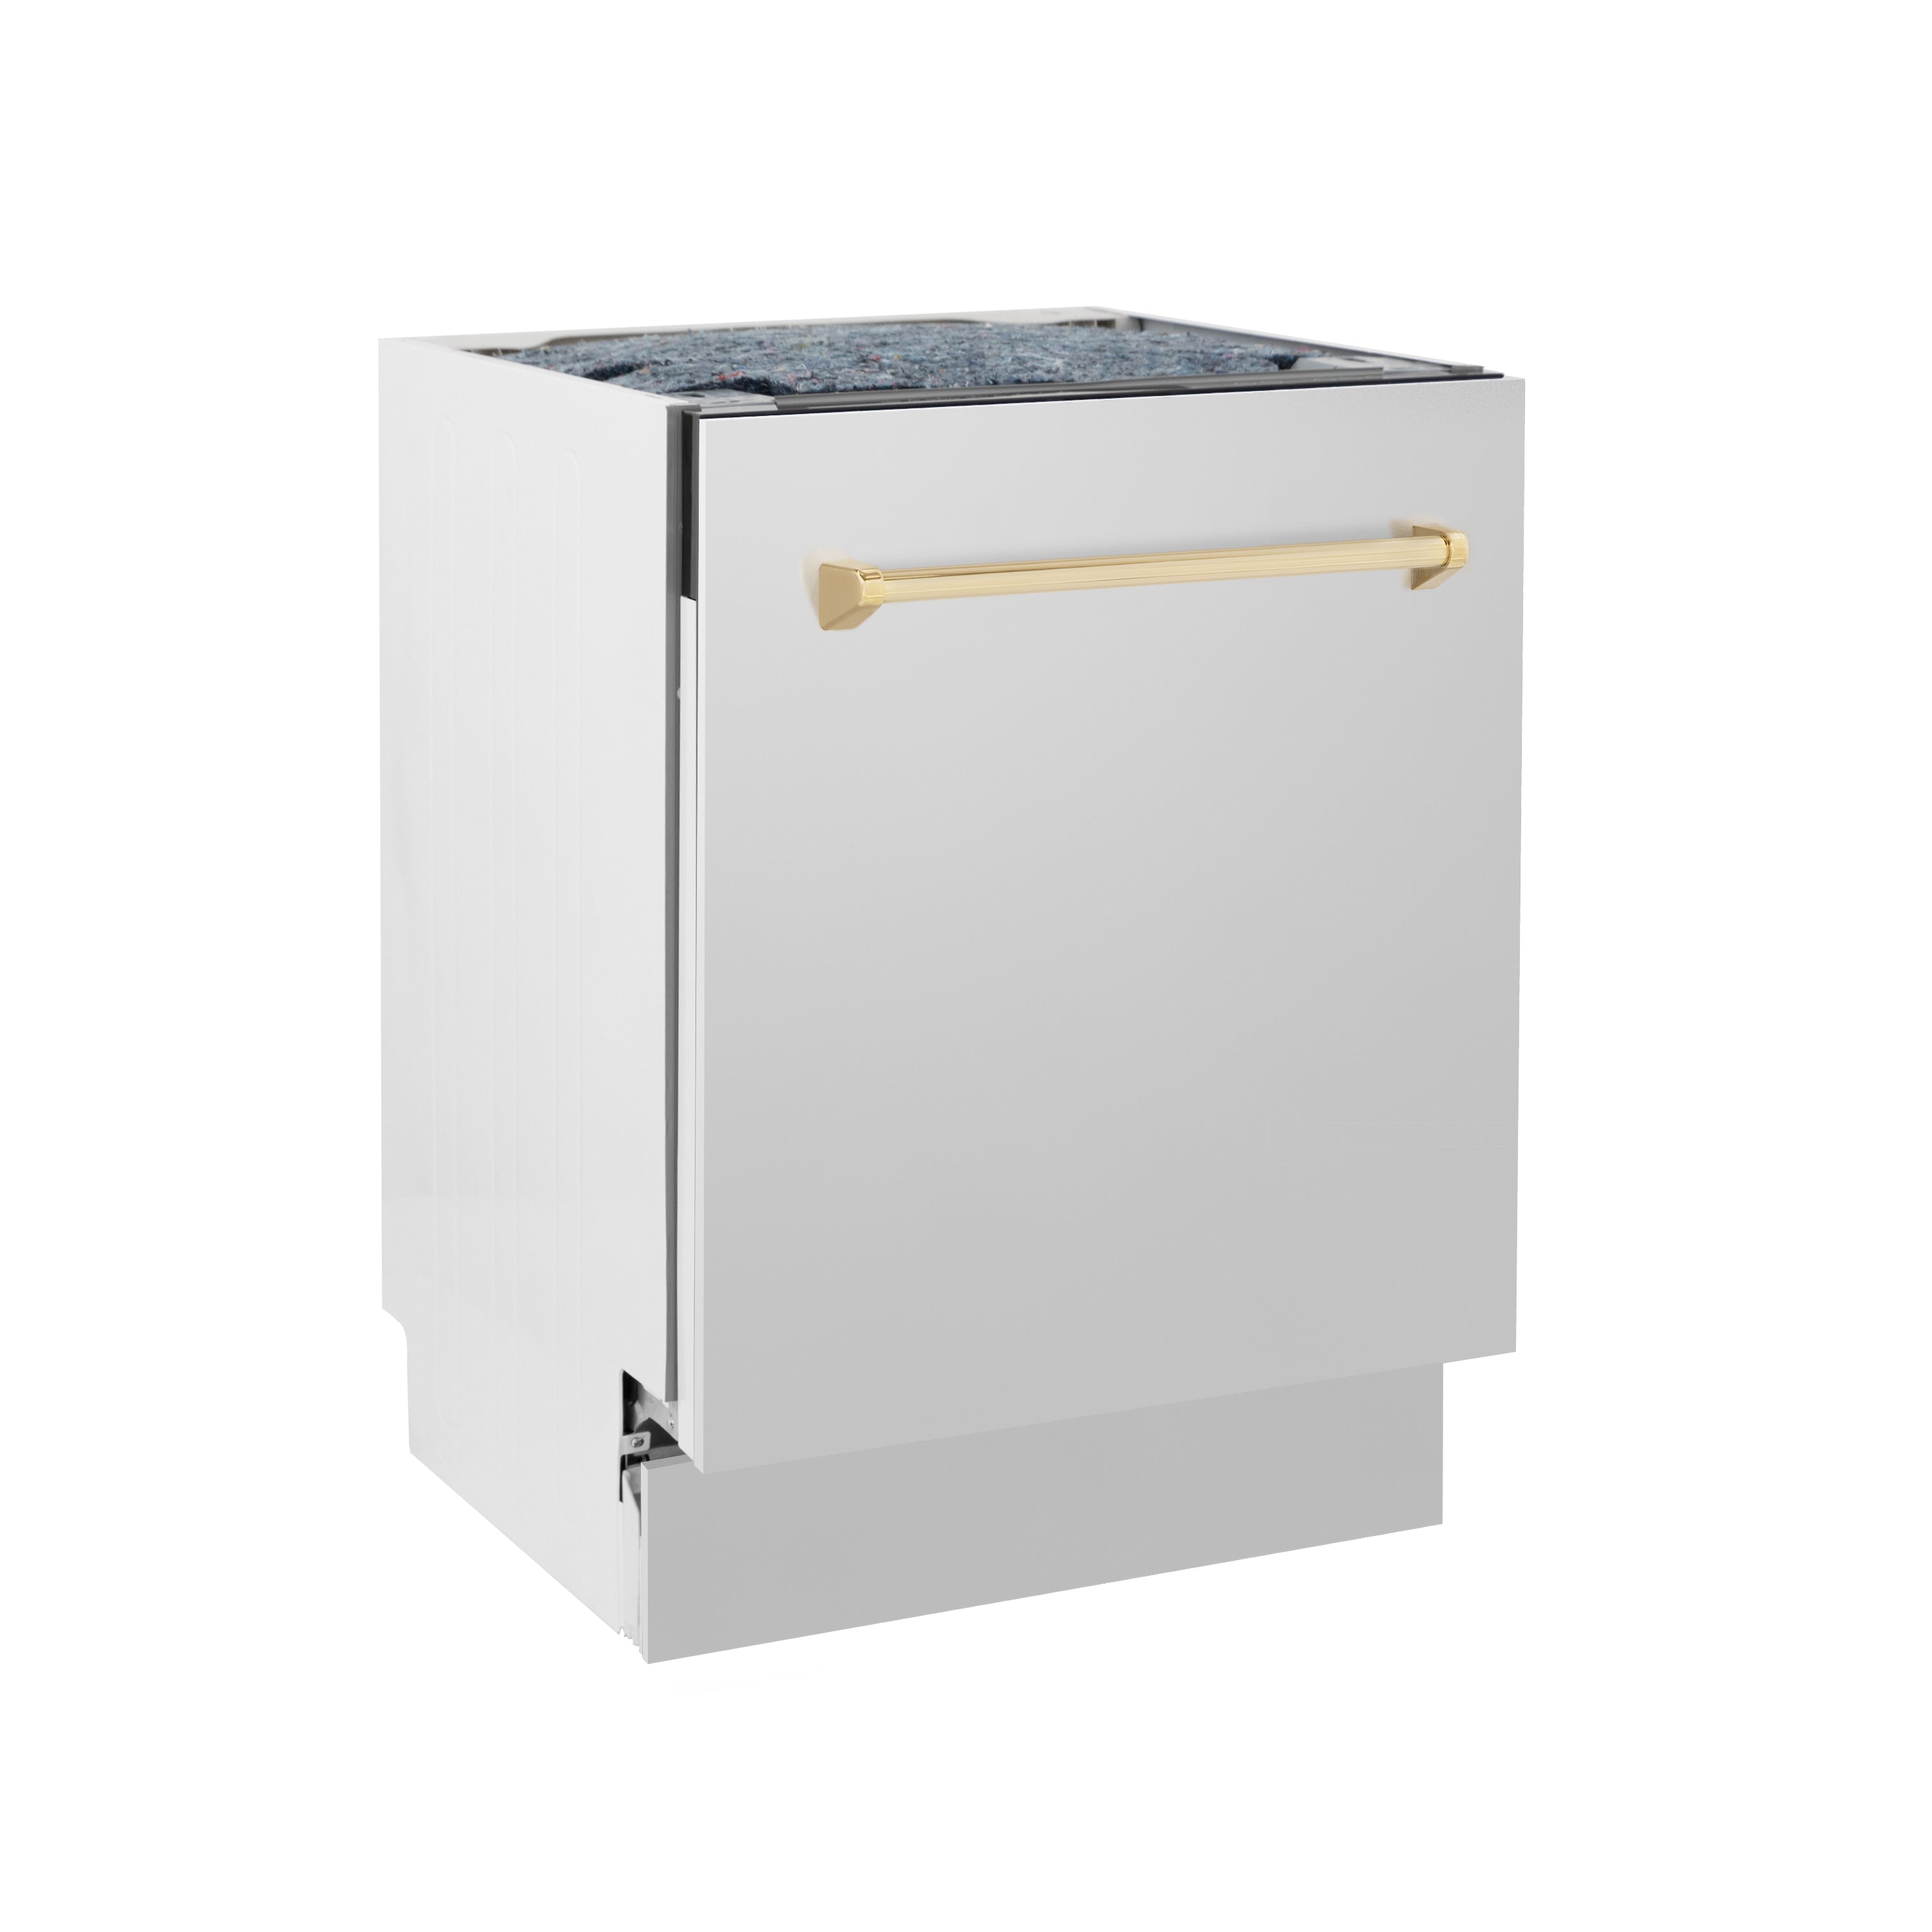 ZLINE Autograph Edition 24 in. 3rd Rack Top Control Tall Tub Dishwasher in Stainless Steel with Polished Gold Handle, 51dBa (DWVZ-304-24-G)